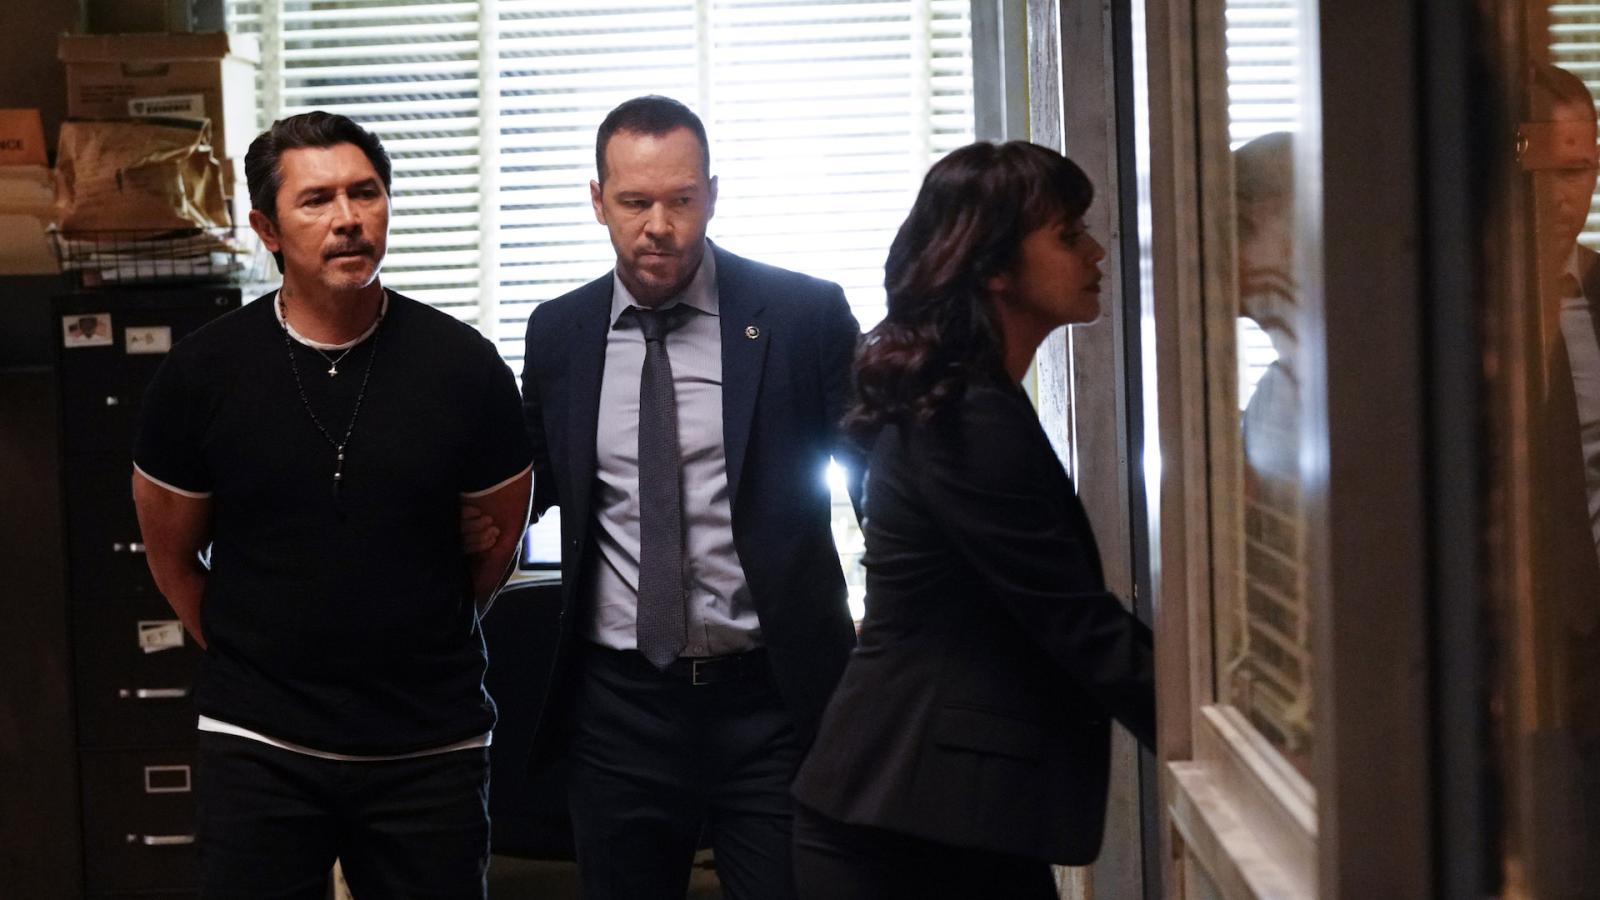 The 10 Best Blue Bloods Guest Stars, Ranked by How Famous They Are - image 1